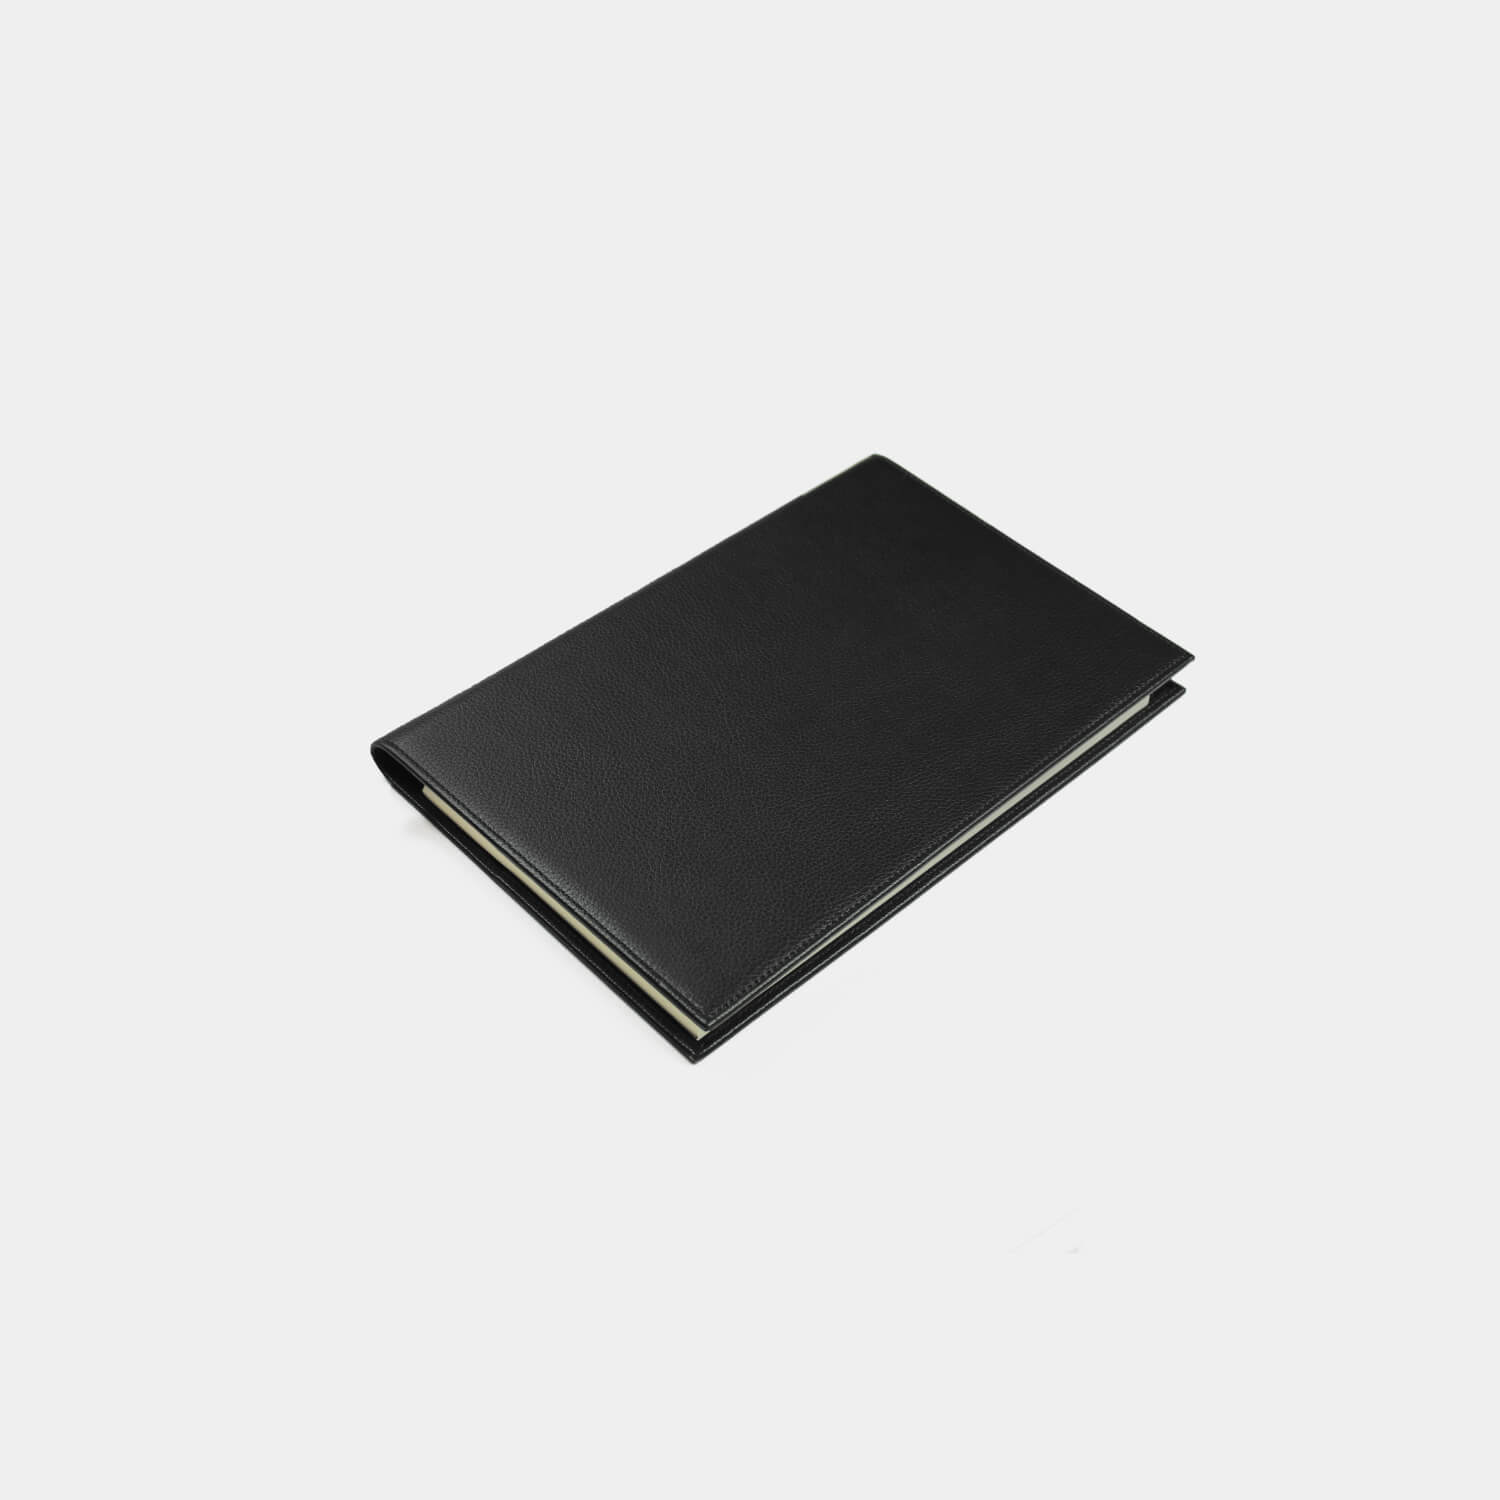 A4 fine grain leather notebook cover with lined 80gsm paper